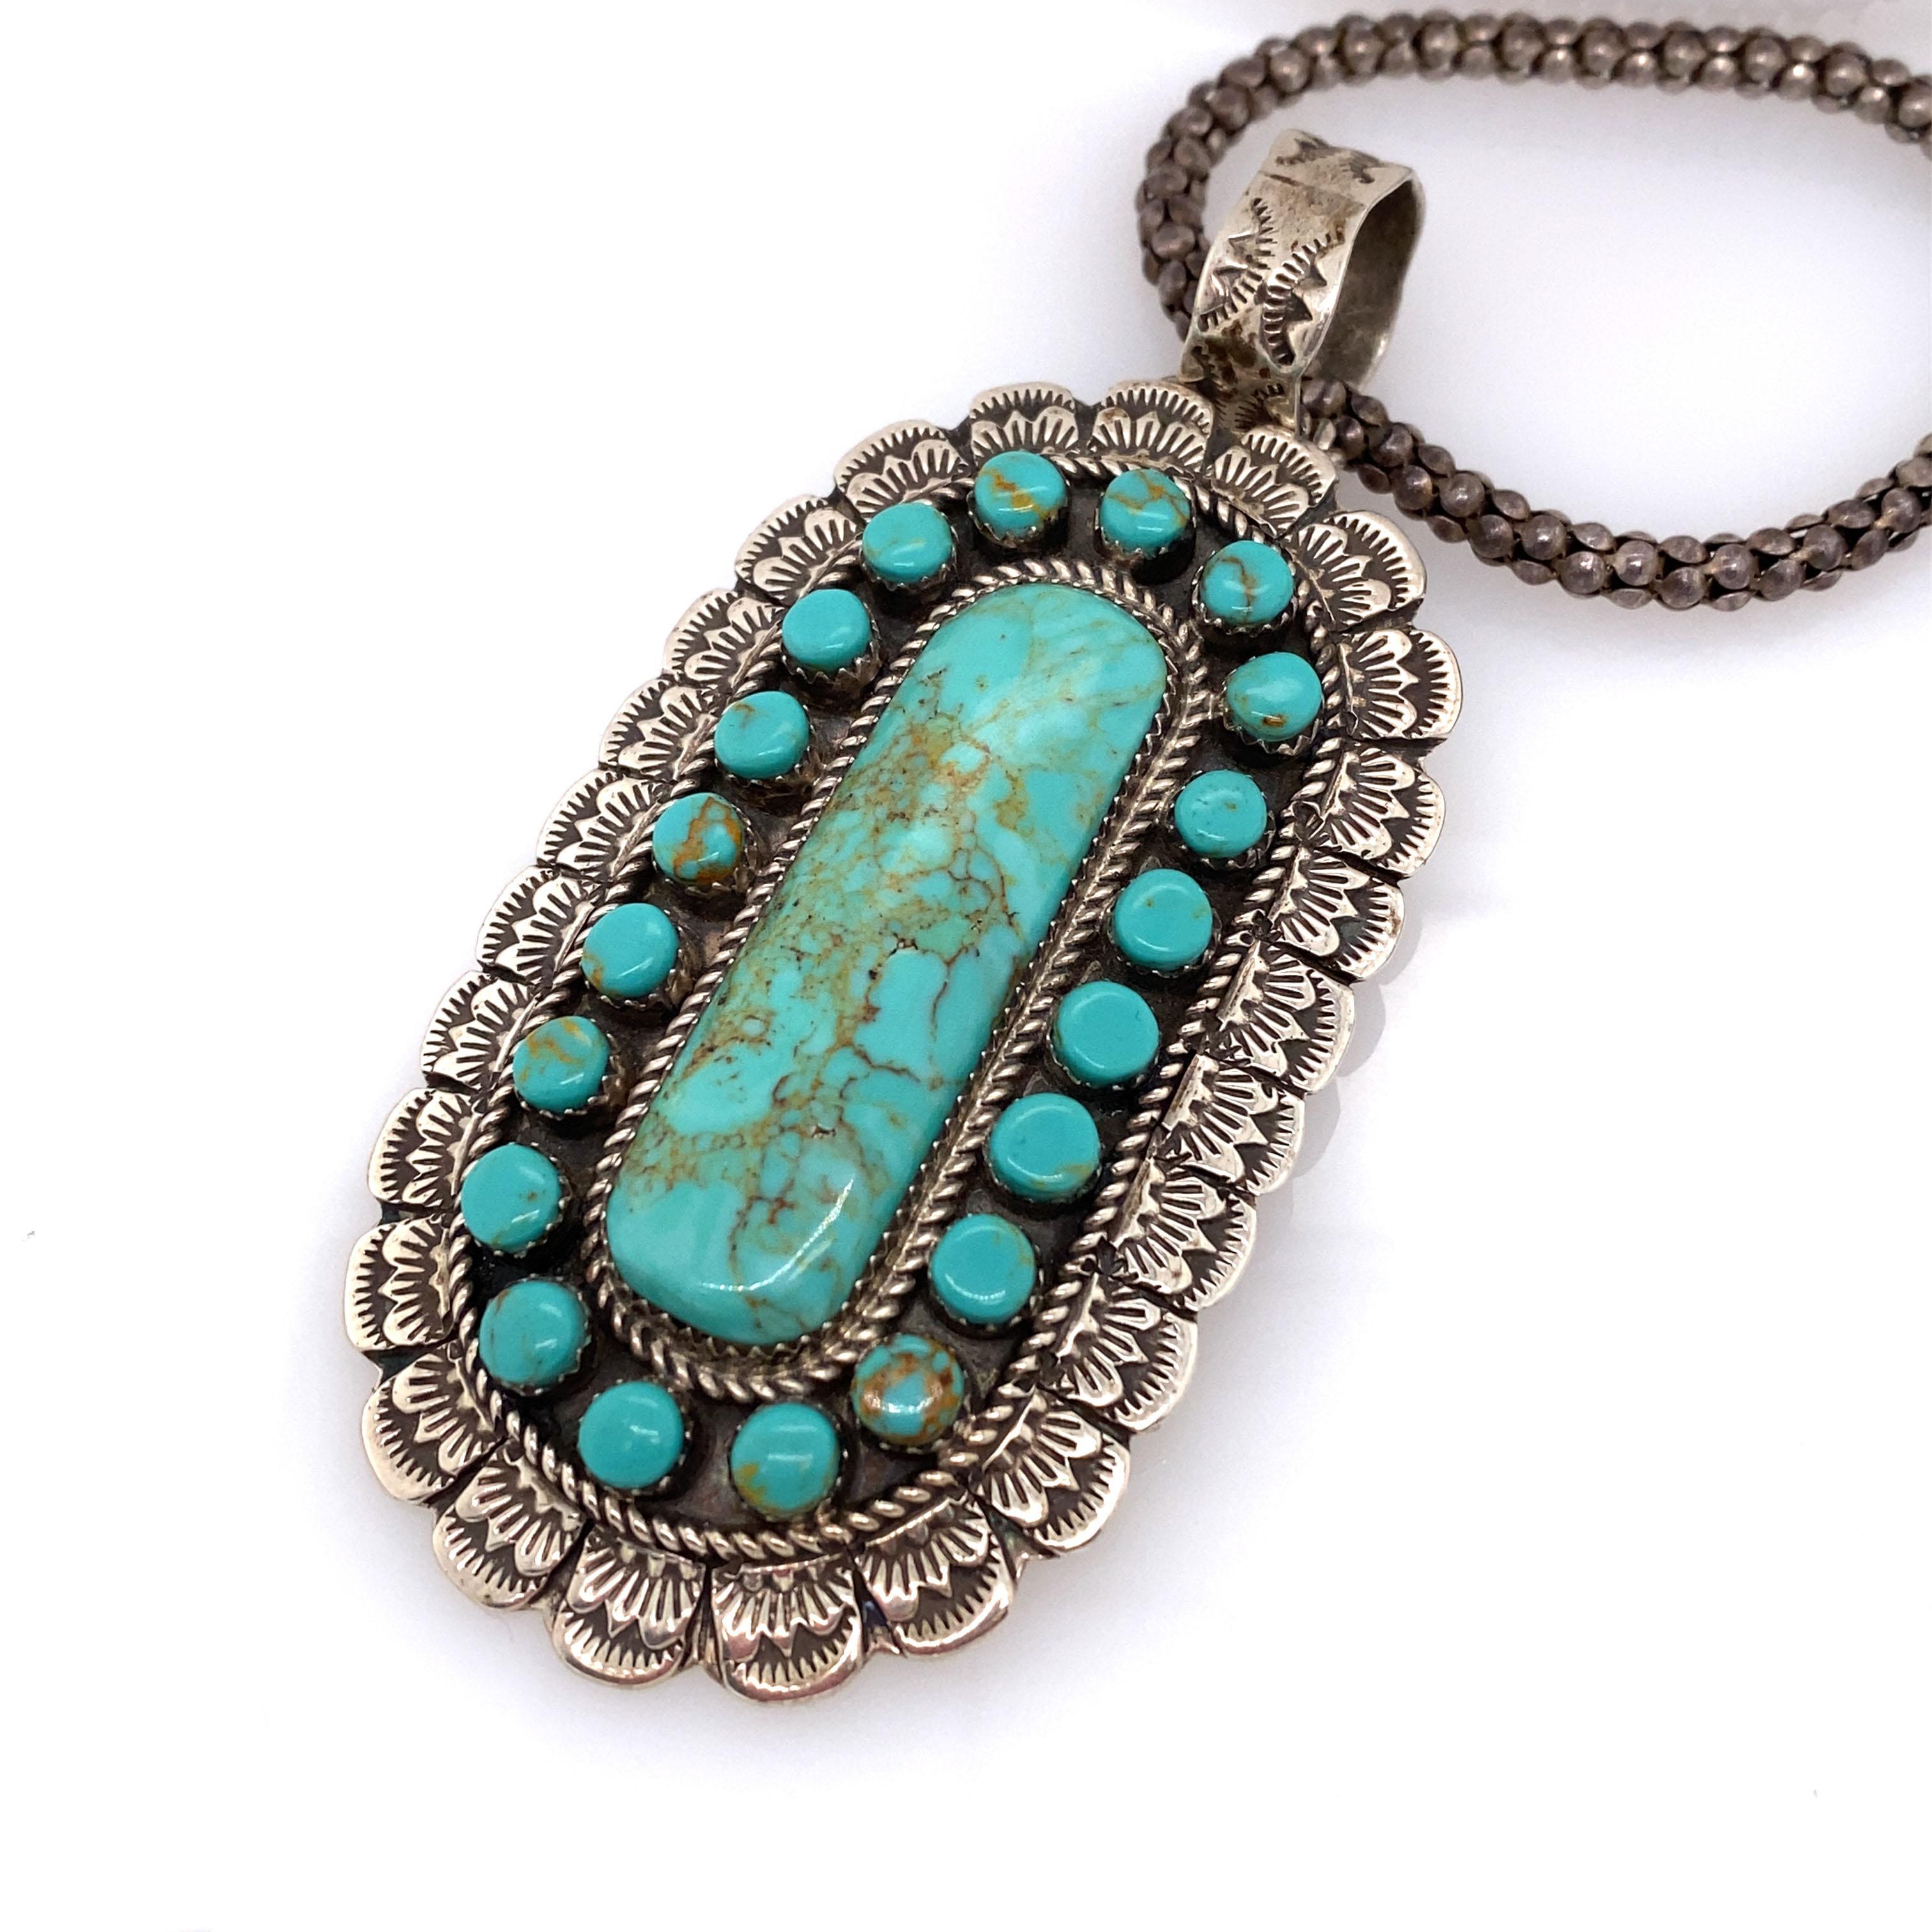 This intricate pendant and chain by Zuni artist Randy Mahooty features lush blue turquoise.

Metal Type: Sterling silver 
Weight: 53.3g
Dimensions: 30 in chain, 3.5in pendant height